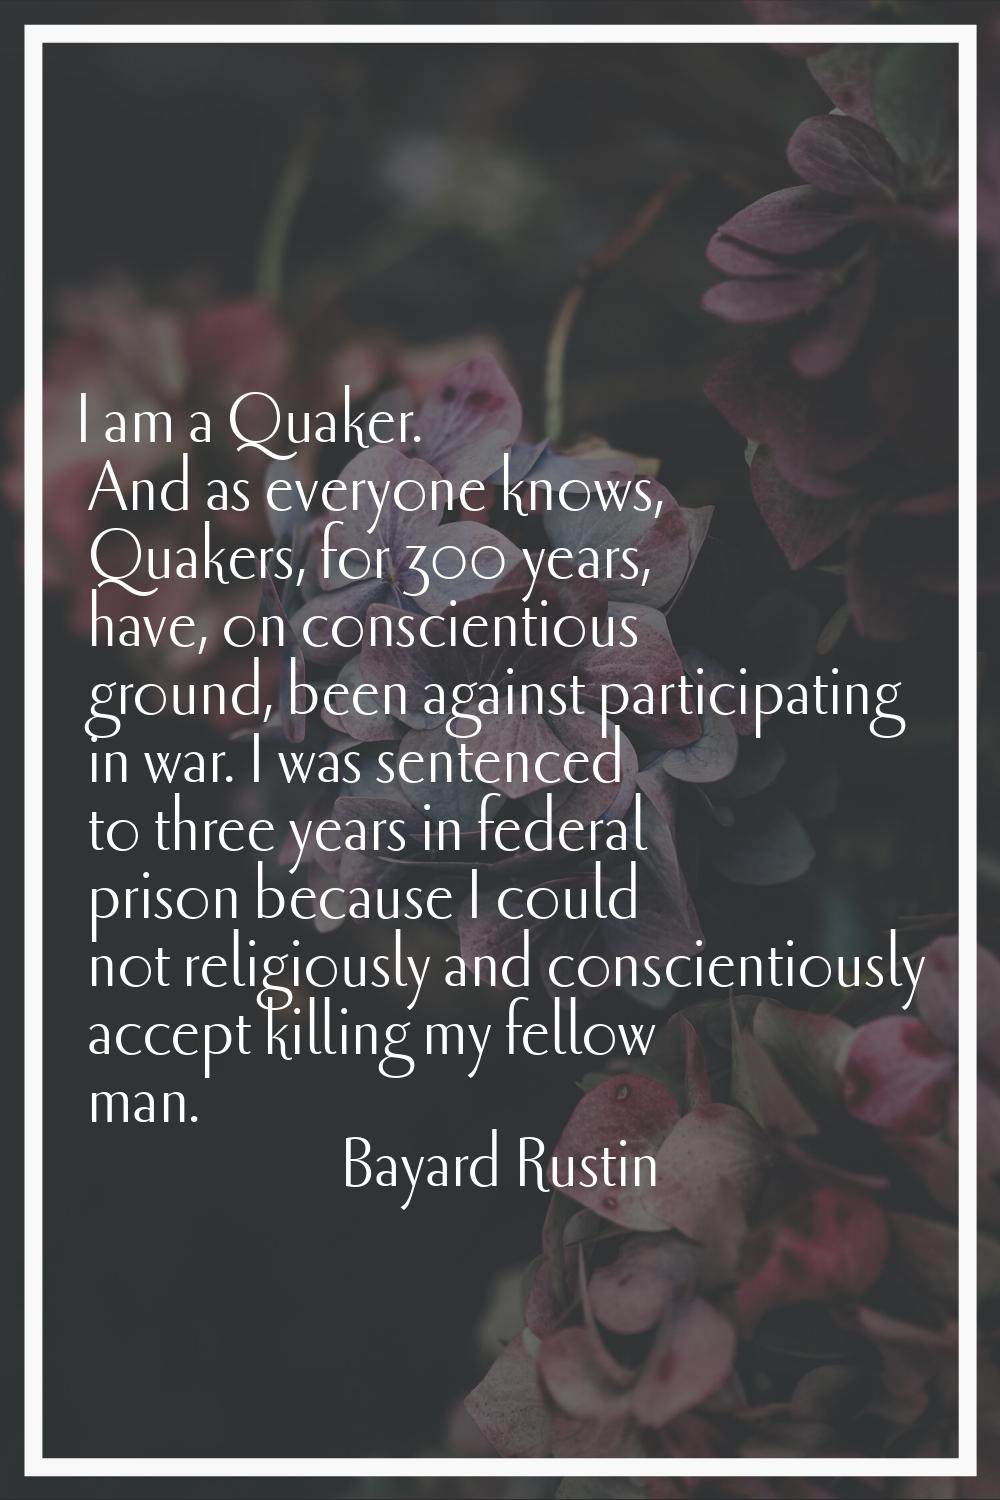 I am a Quaker. And as everyone knows, Quakers, for 300 years, have, on conscientious ground, been a